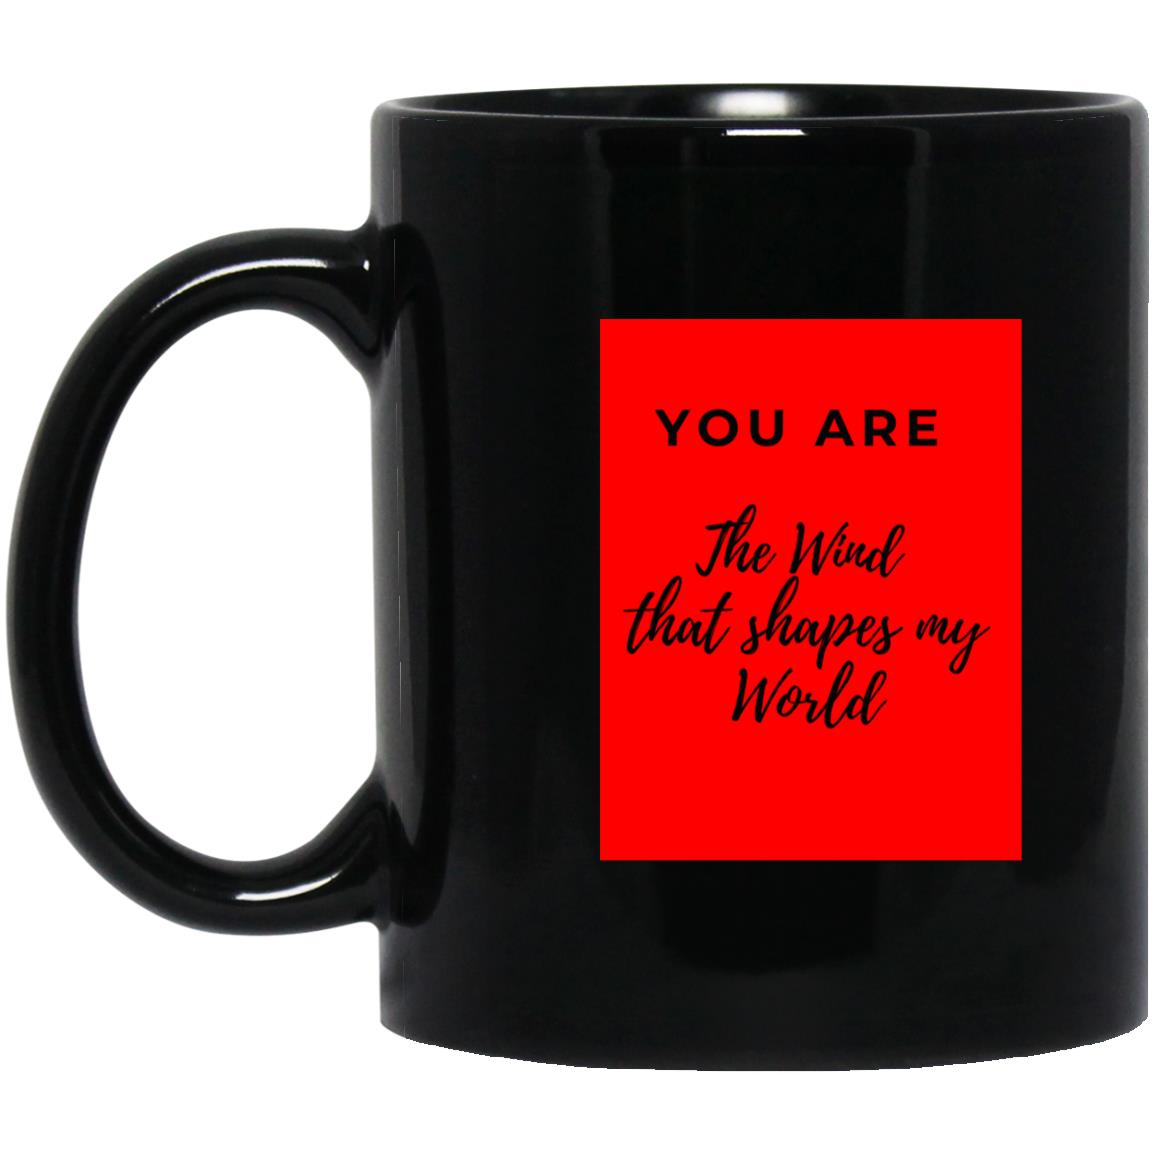 You are the Wind that shapes my world Mugs - Group 4